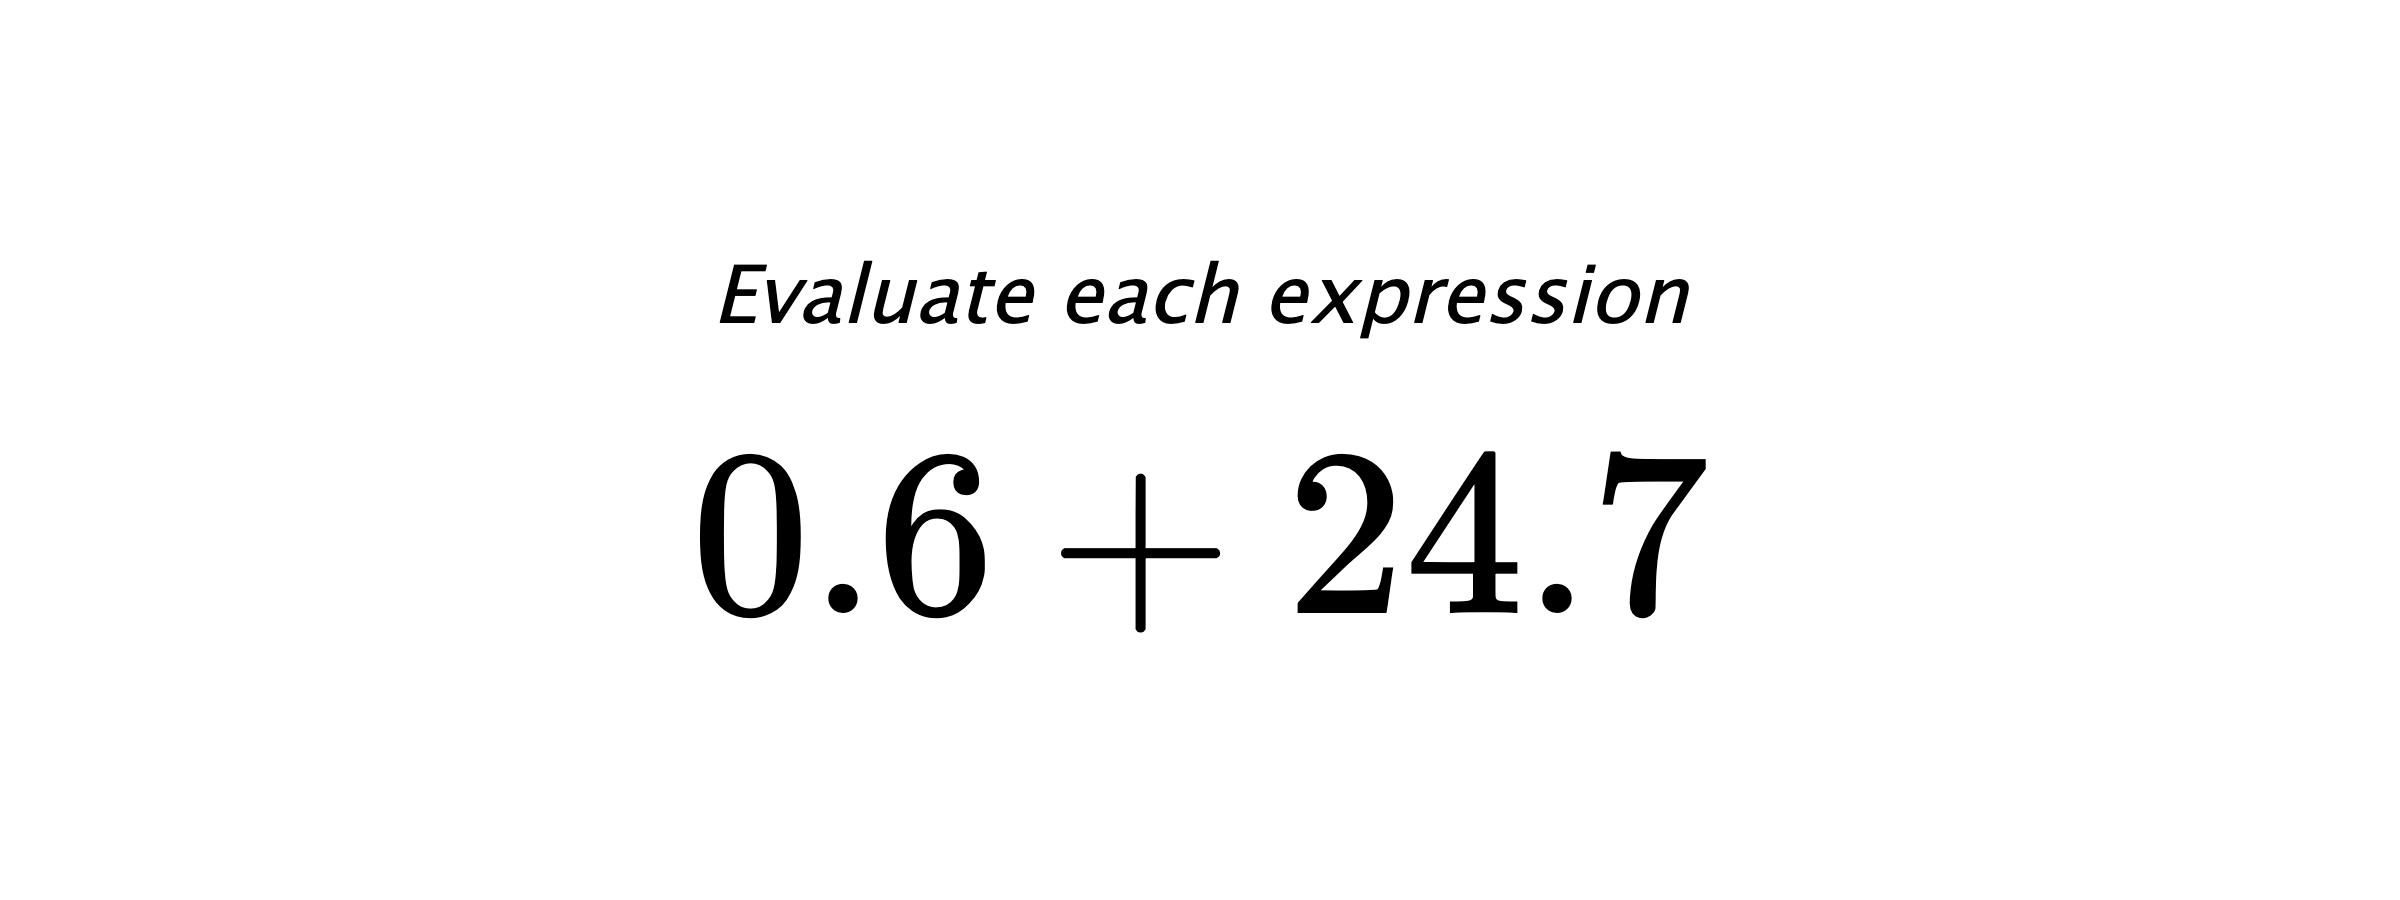 Evaluate each expression $ 0.6+24.7 $